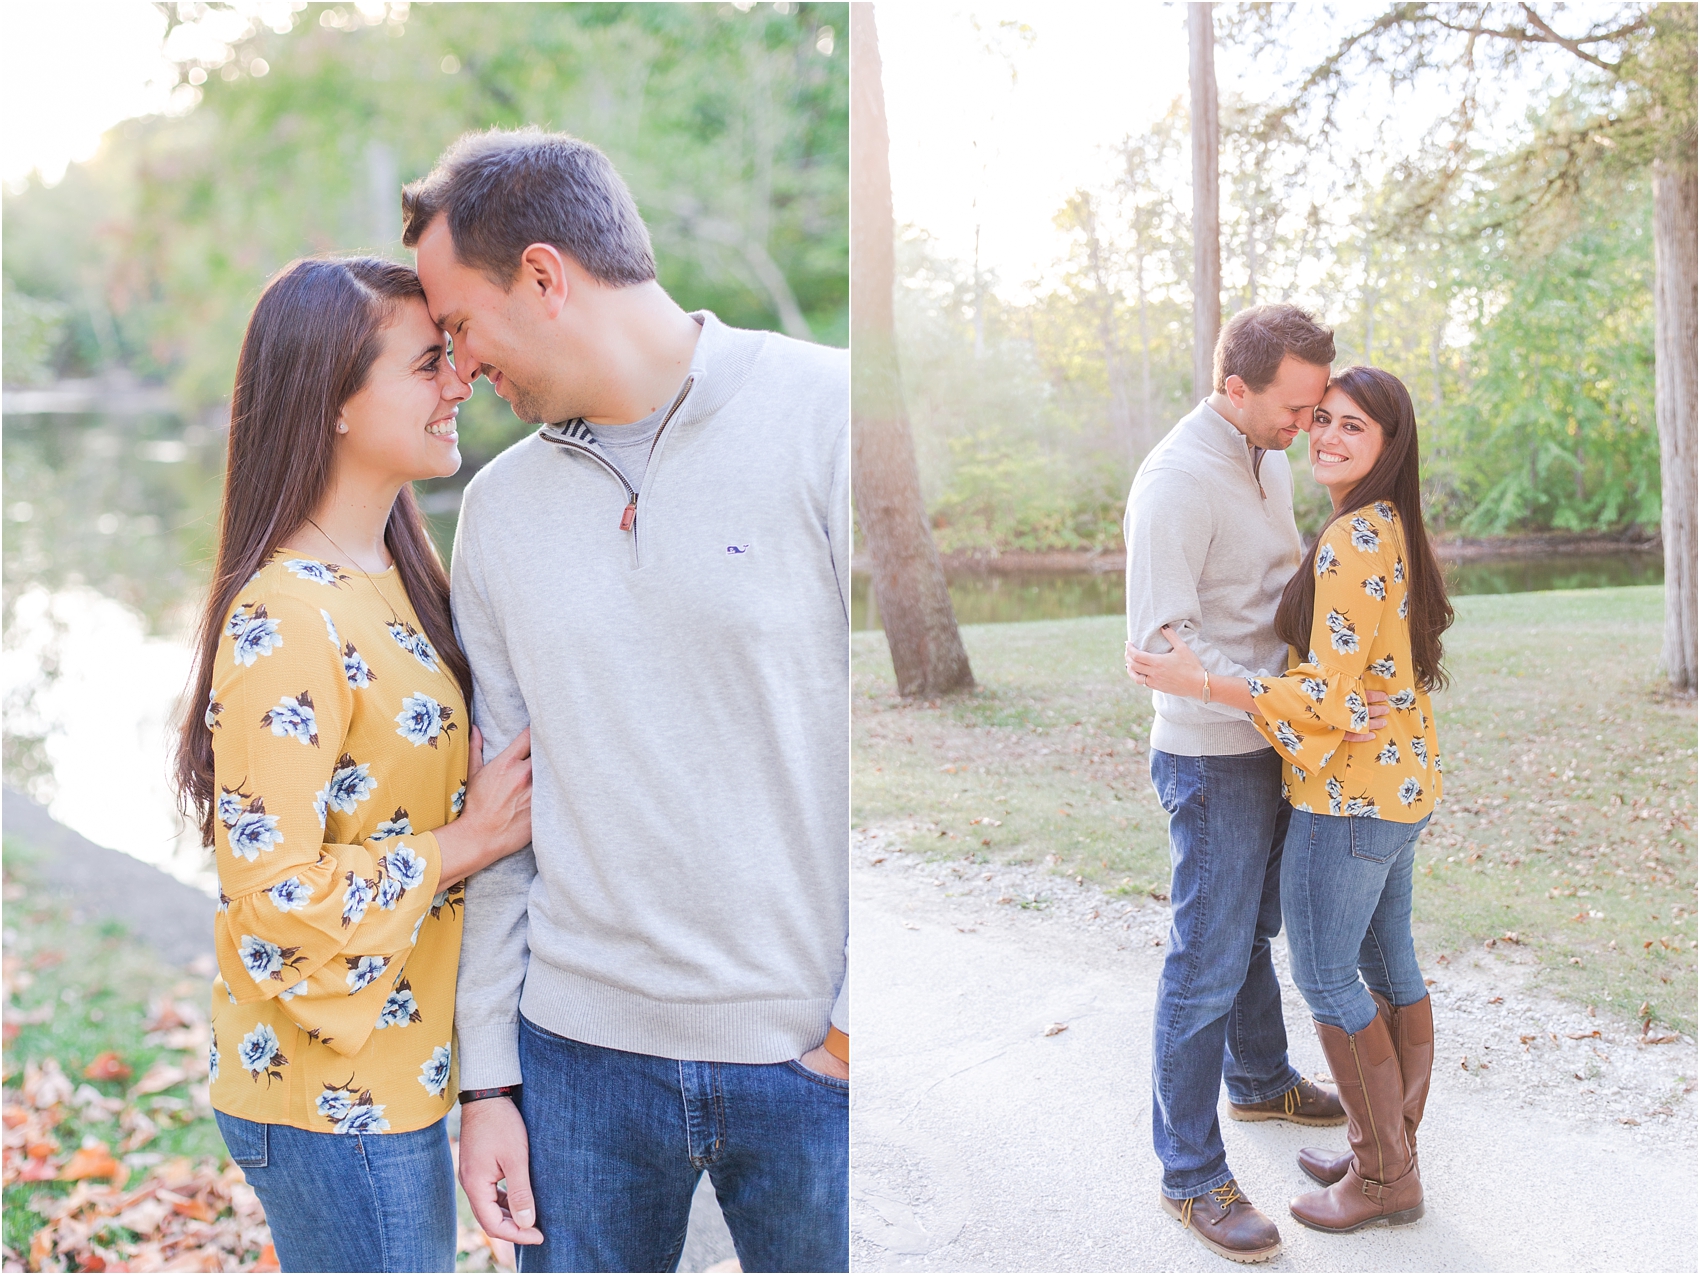 relaxed-autumn-engagement-photos-at-hudson-mills-metropark-in-dexter-mi-by-courtney-carolyn-photography_0018.jpg